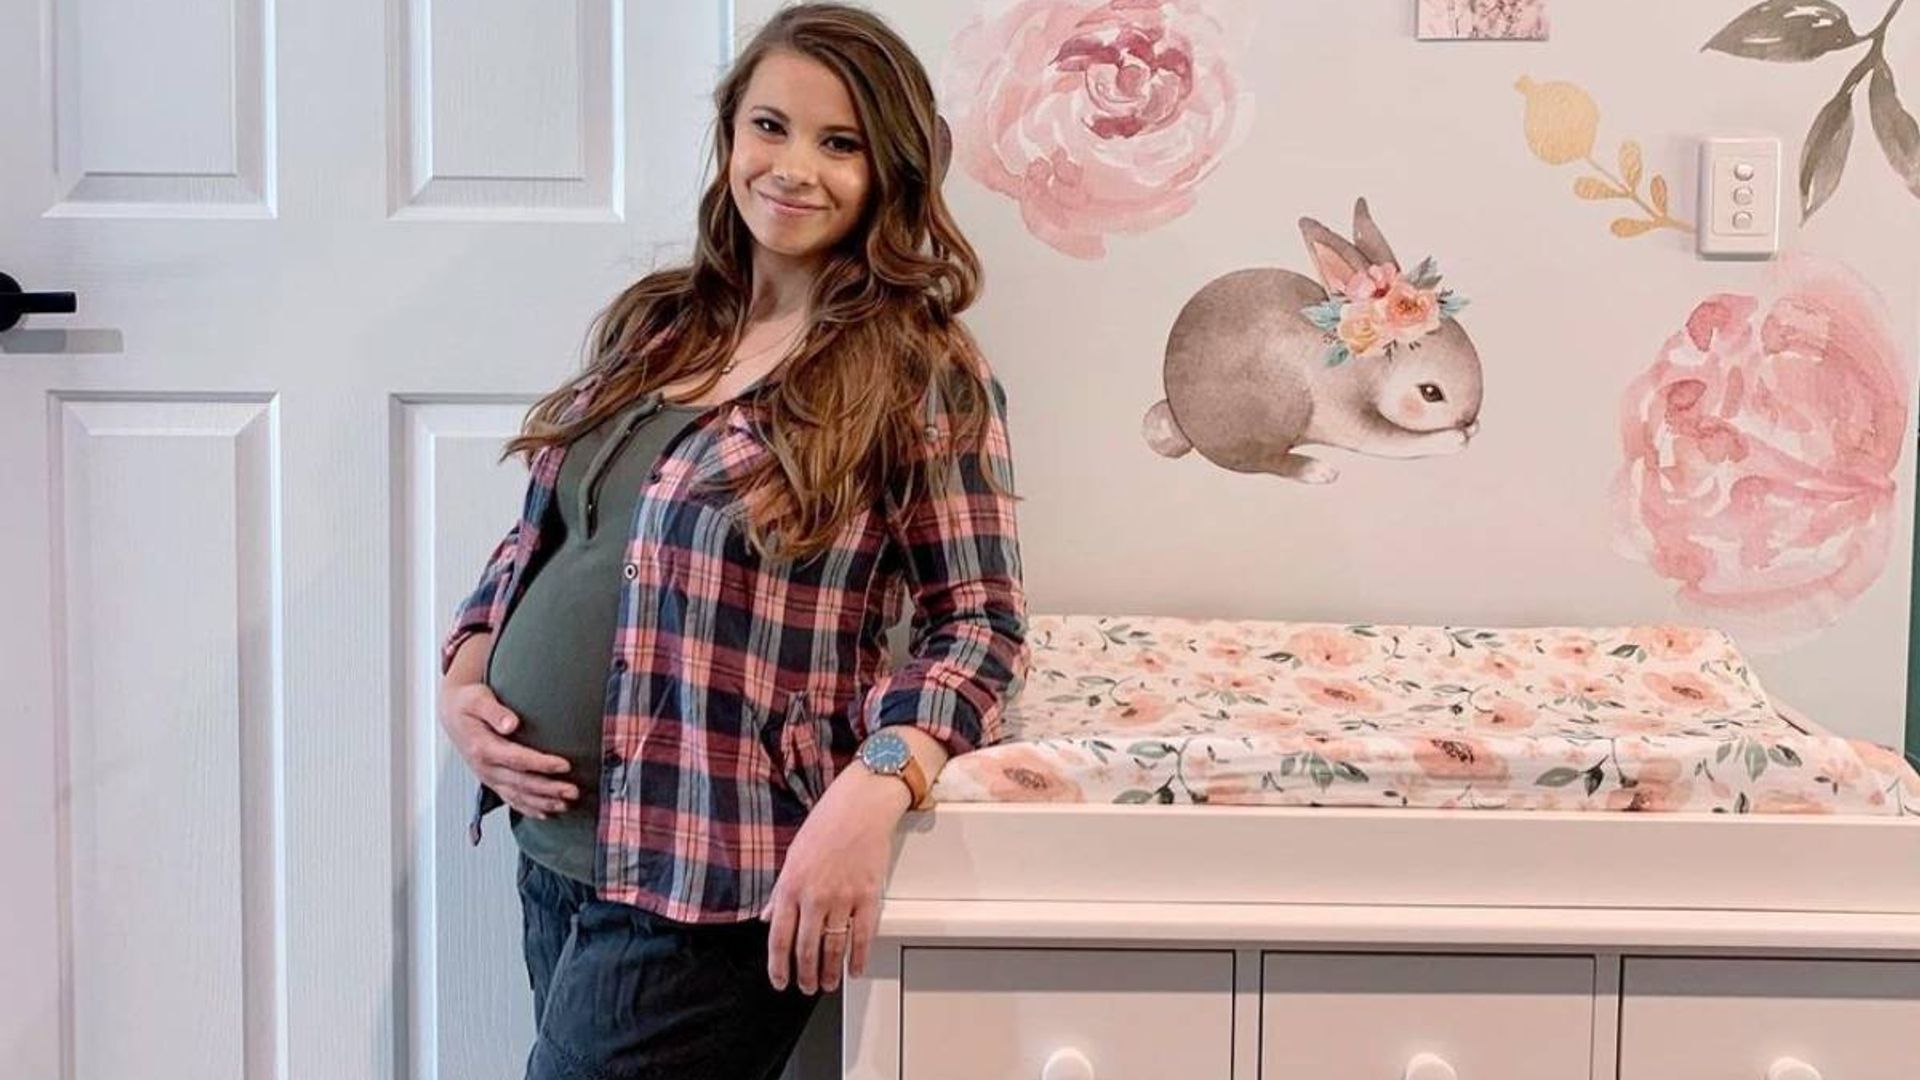 Bindi Irwin welcomes baby girl and you won't believe her name - see the photo